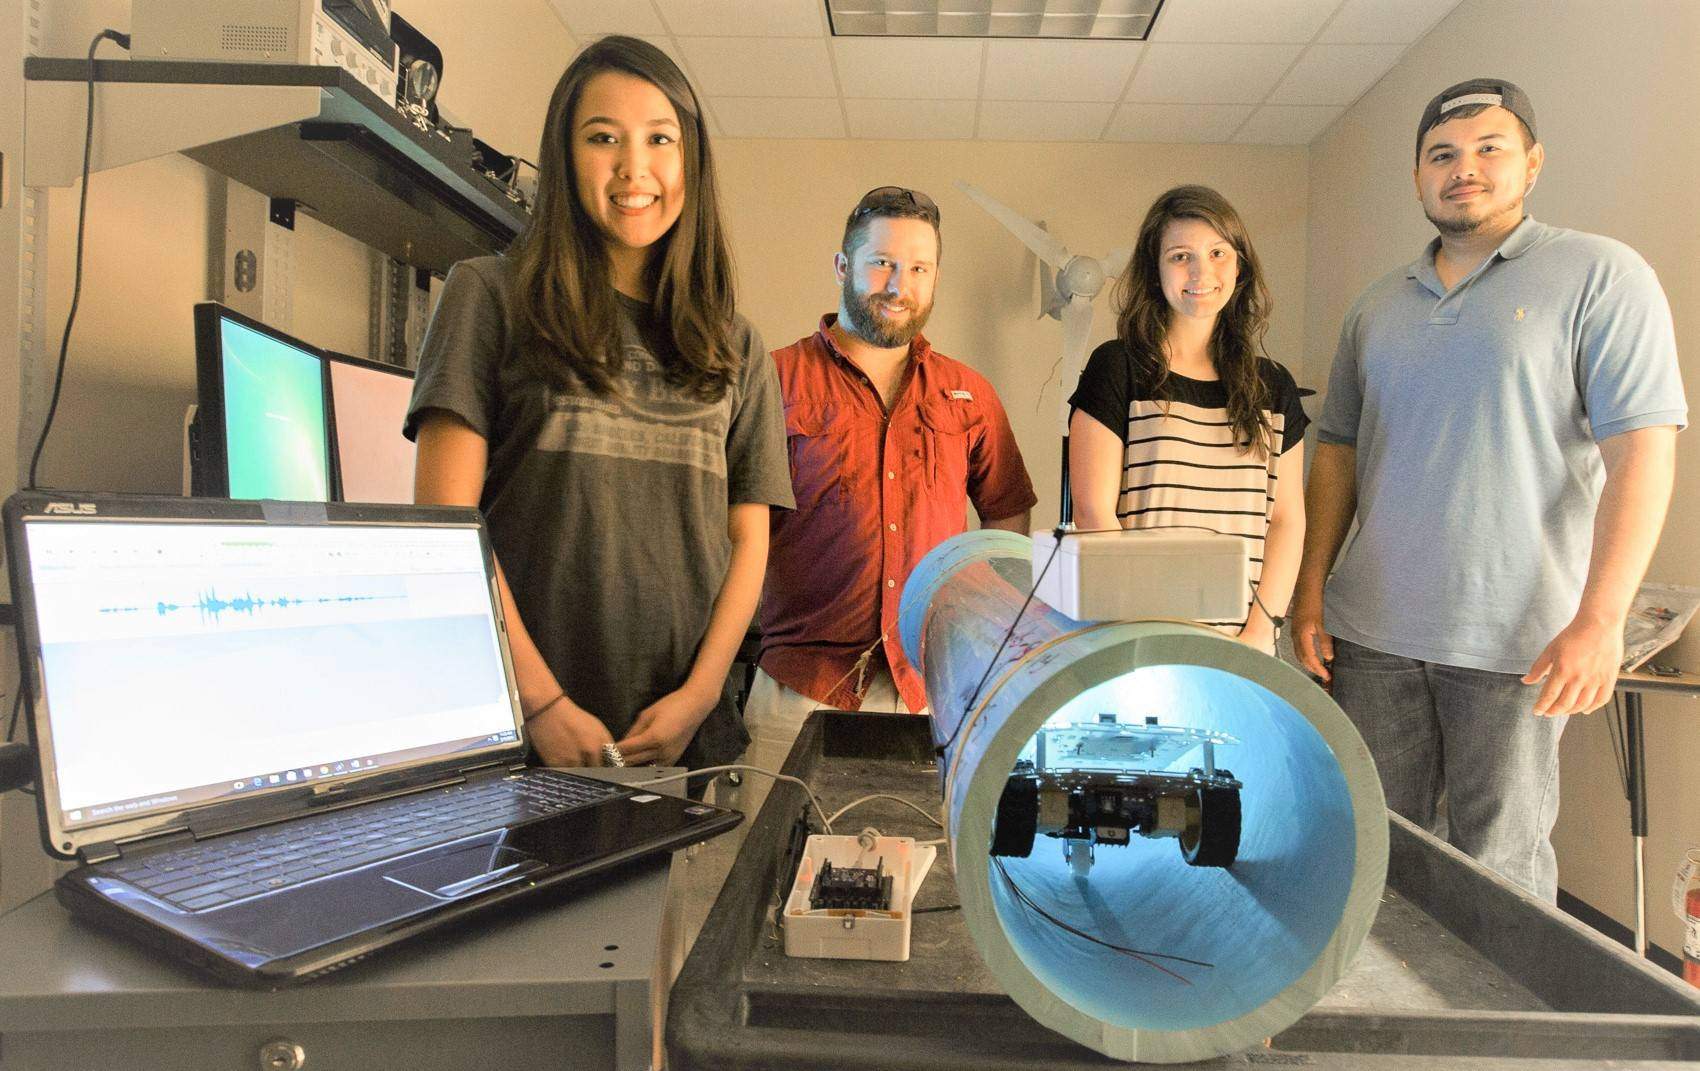 Four students research team standing with project